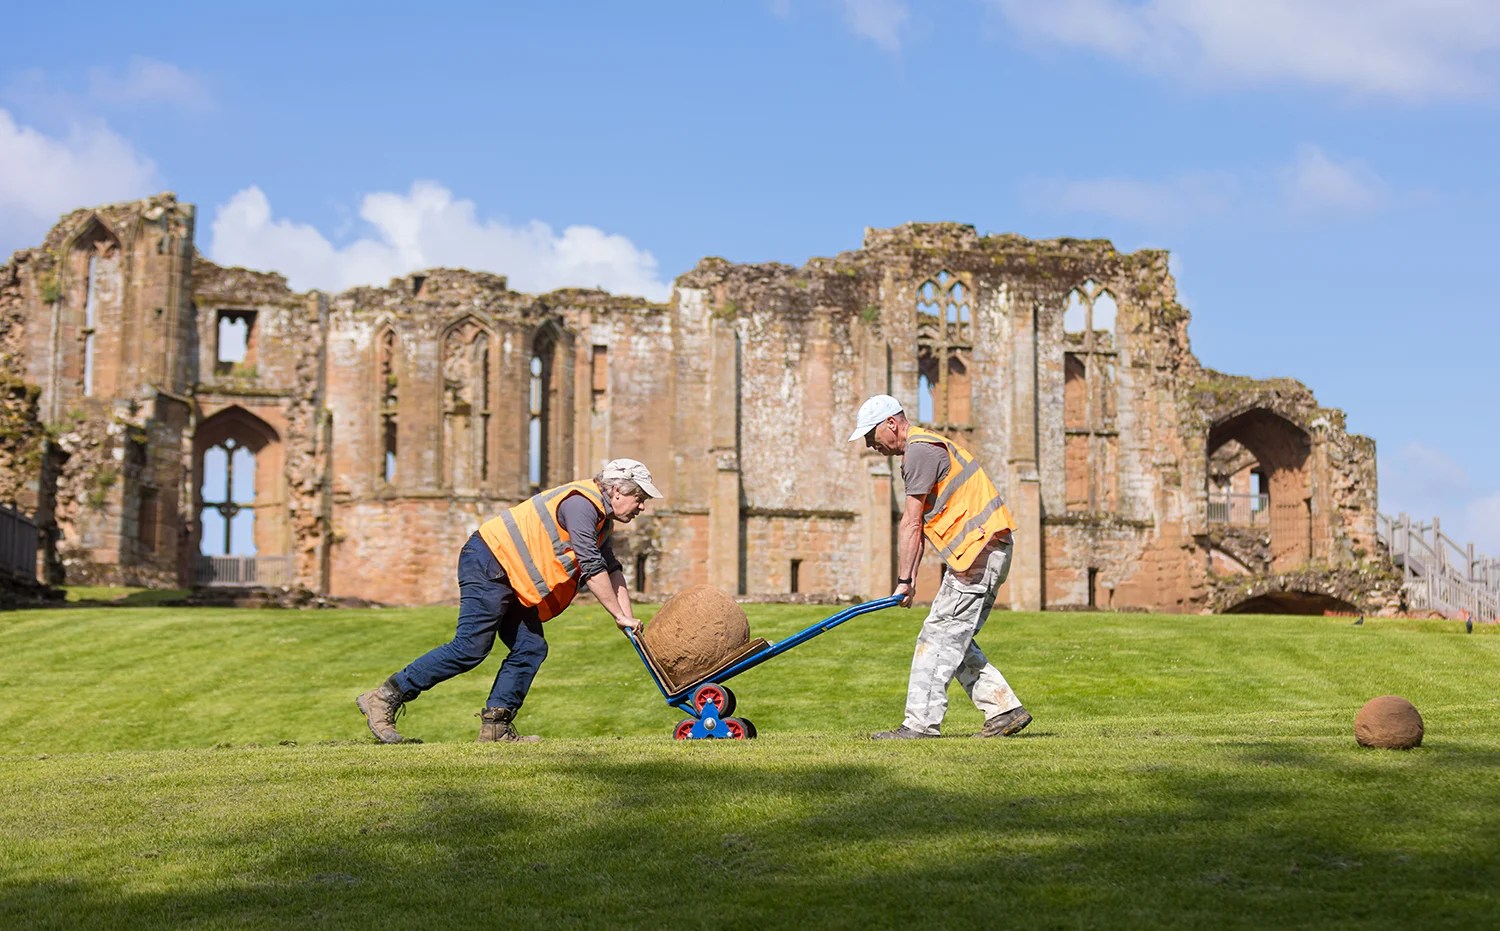 two workers in orange vests carry a large stone on a dolly in front of a medieval castle 